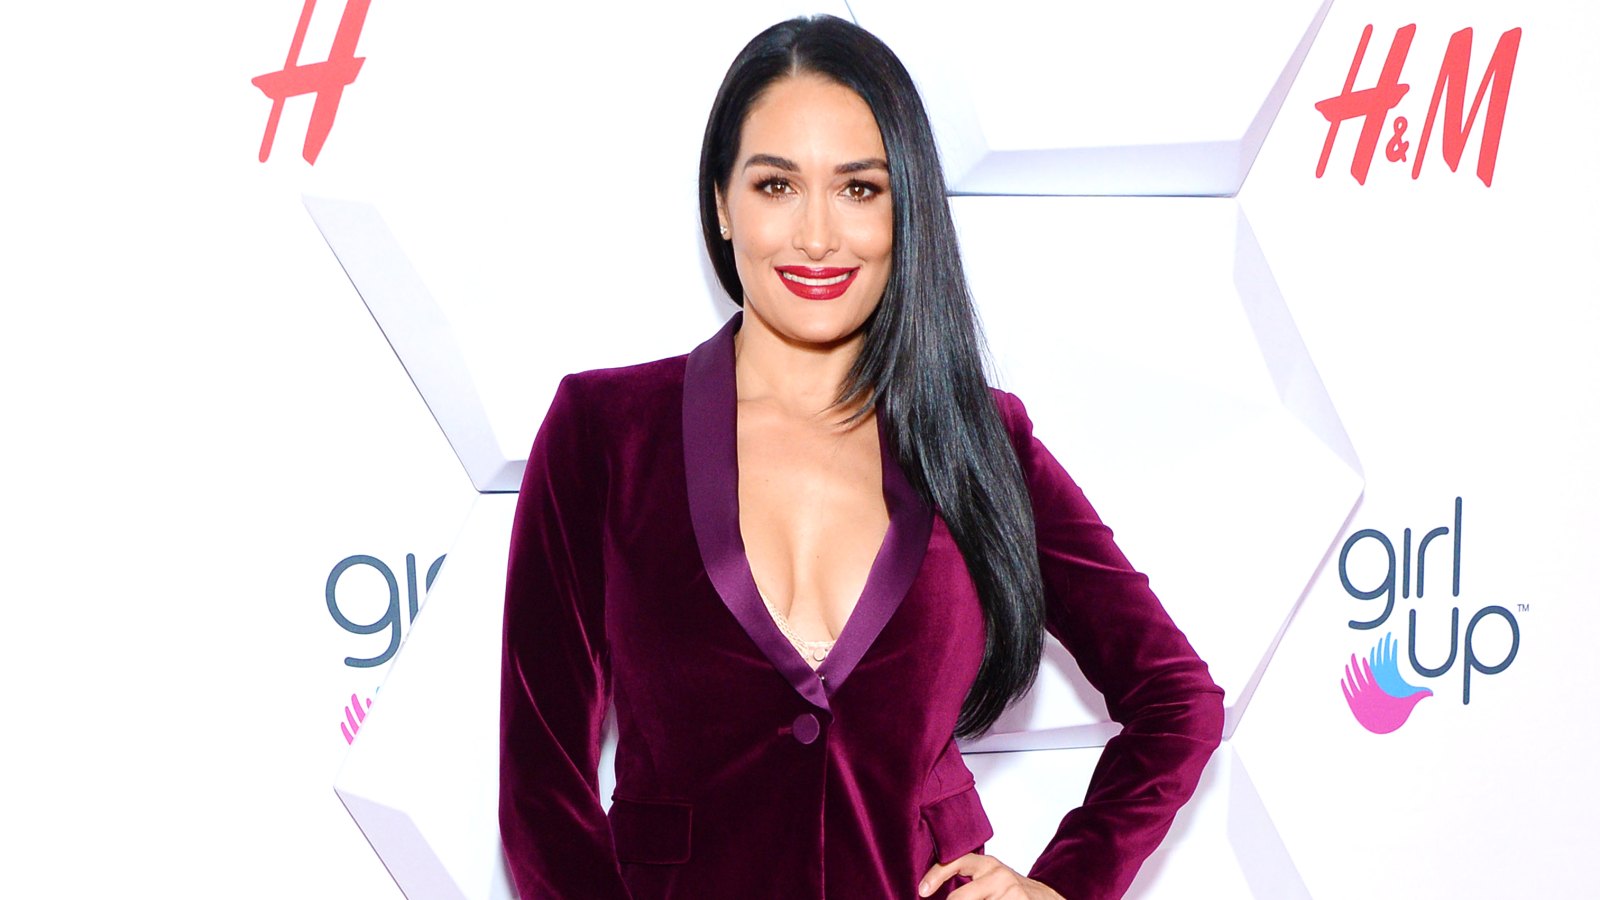 Nikki Bella Shows Off Her Bare Baby Bump While Dancing in WWE Costume